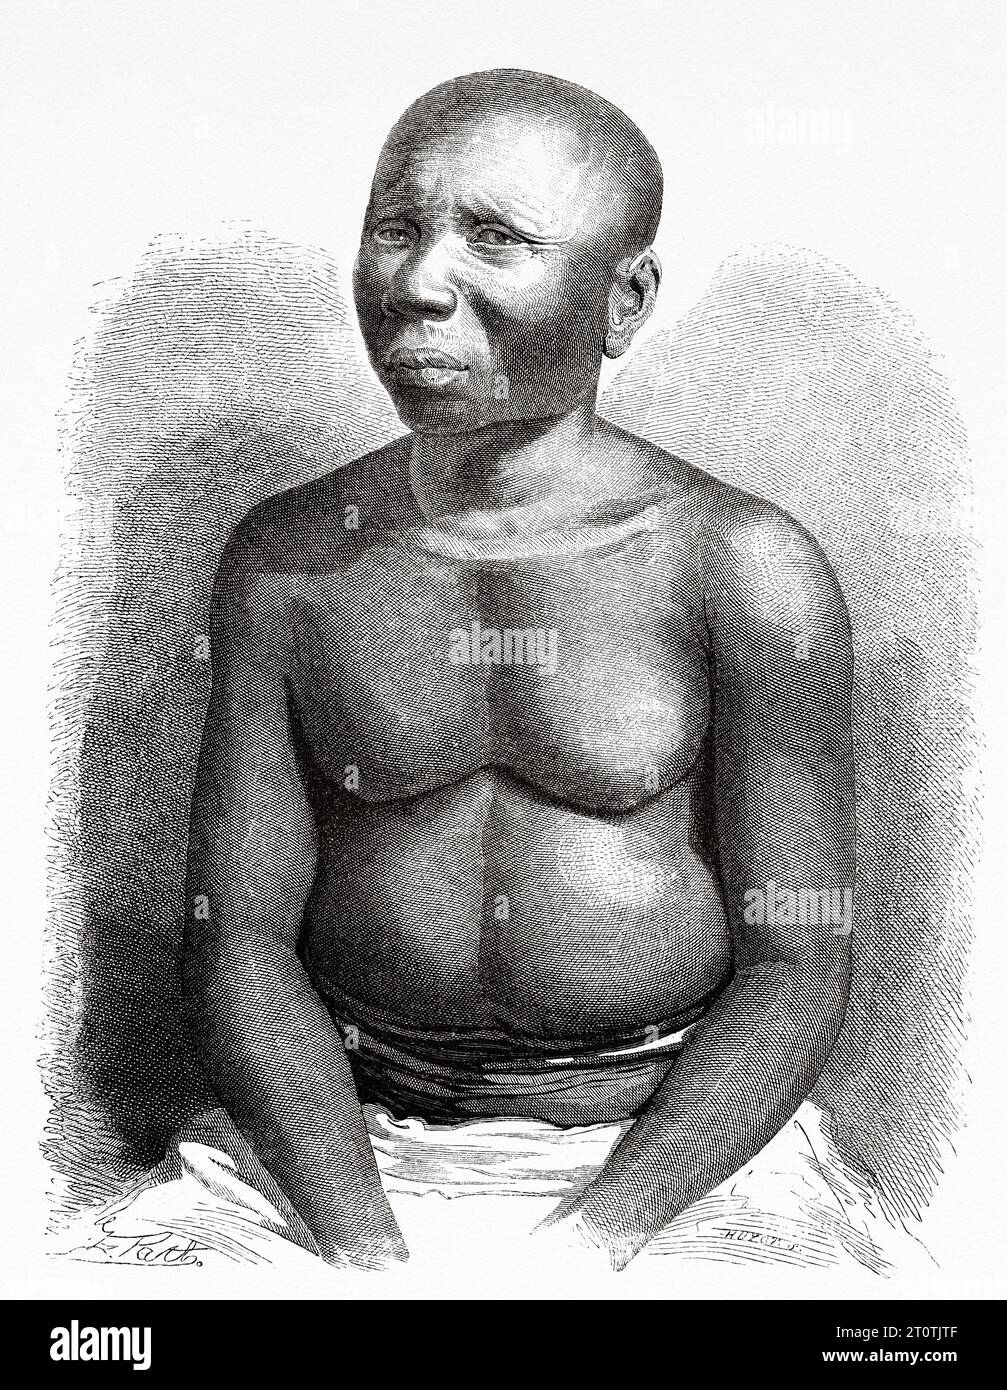 Native man from the Andaman and Nicobar Islands, South India, Indian Ocean. Old 19th century engraving from Le Tour du Monde 1860 Stock Photo